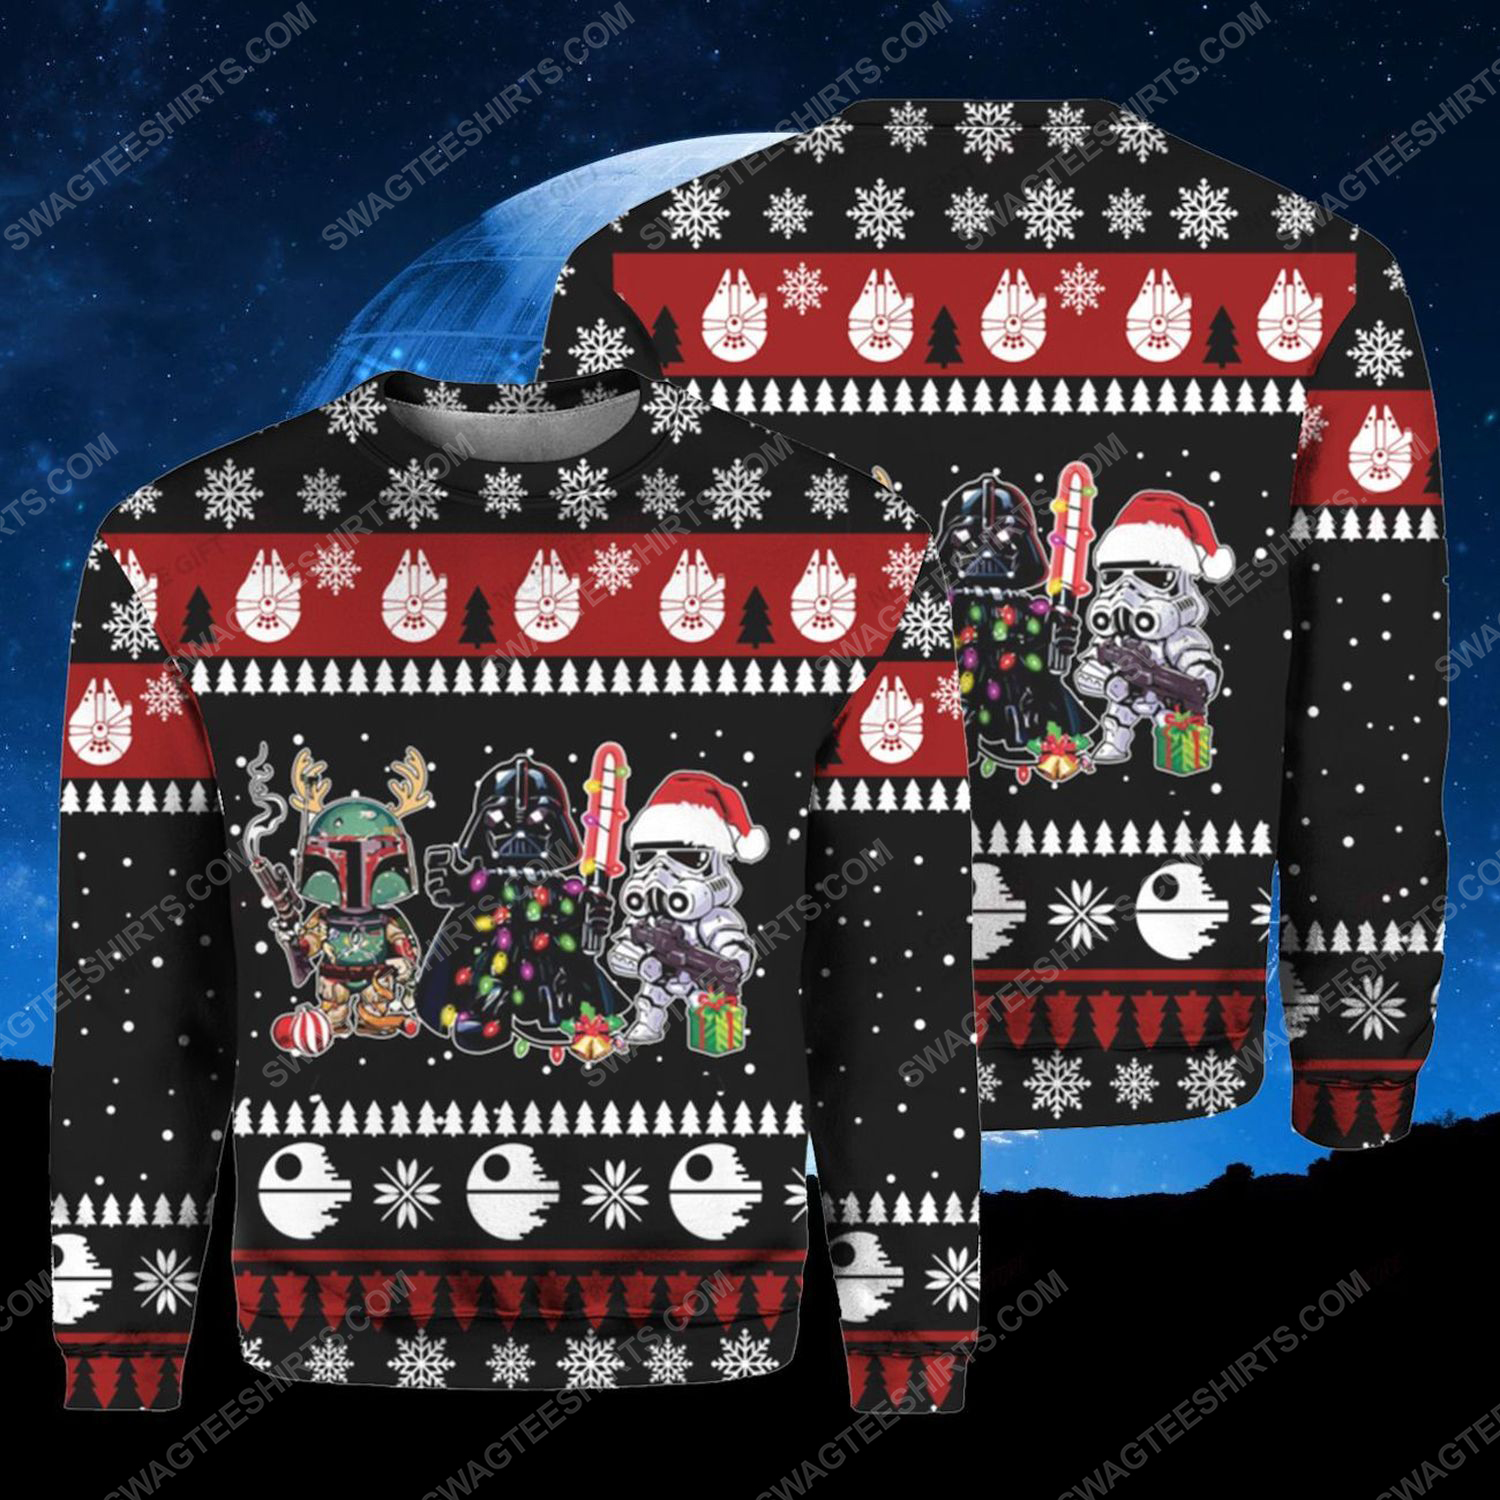 Star wars darth vader and stormtrooper ugly christmas sweater 1 - Copy (2)